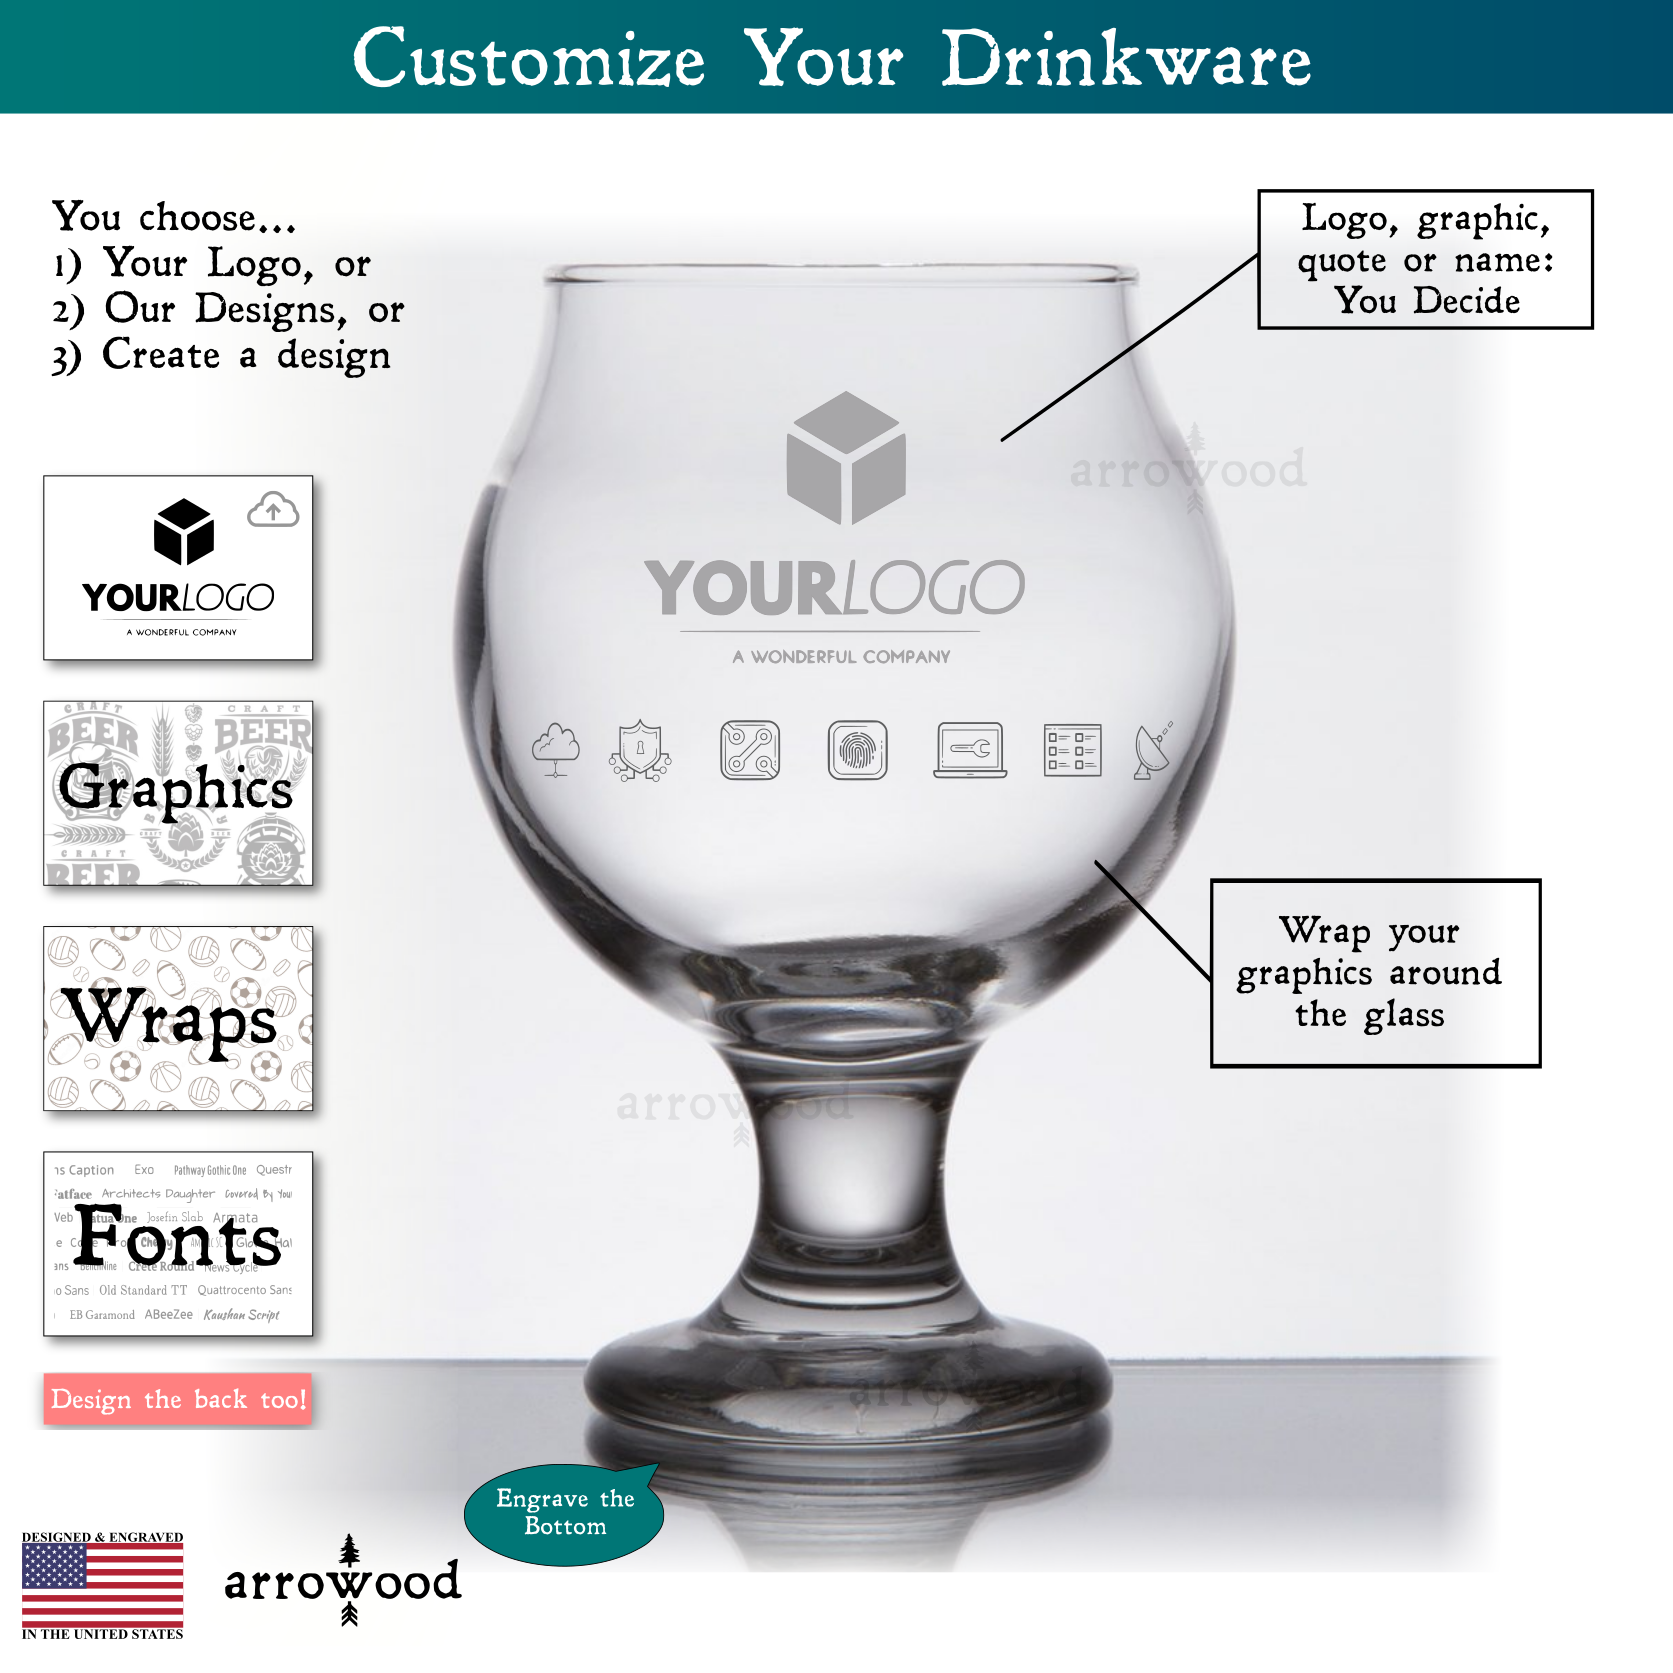 Logo Glass Corporate Give Away Custom Beer Can Glass or 